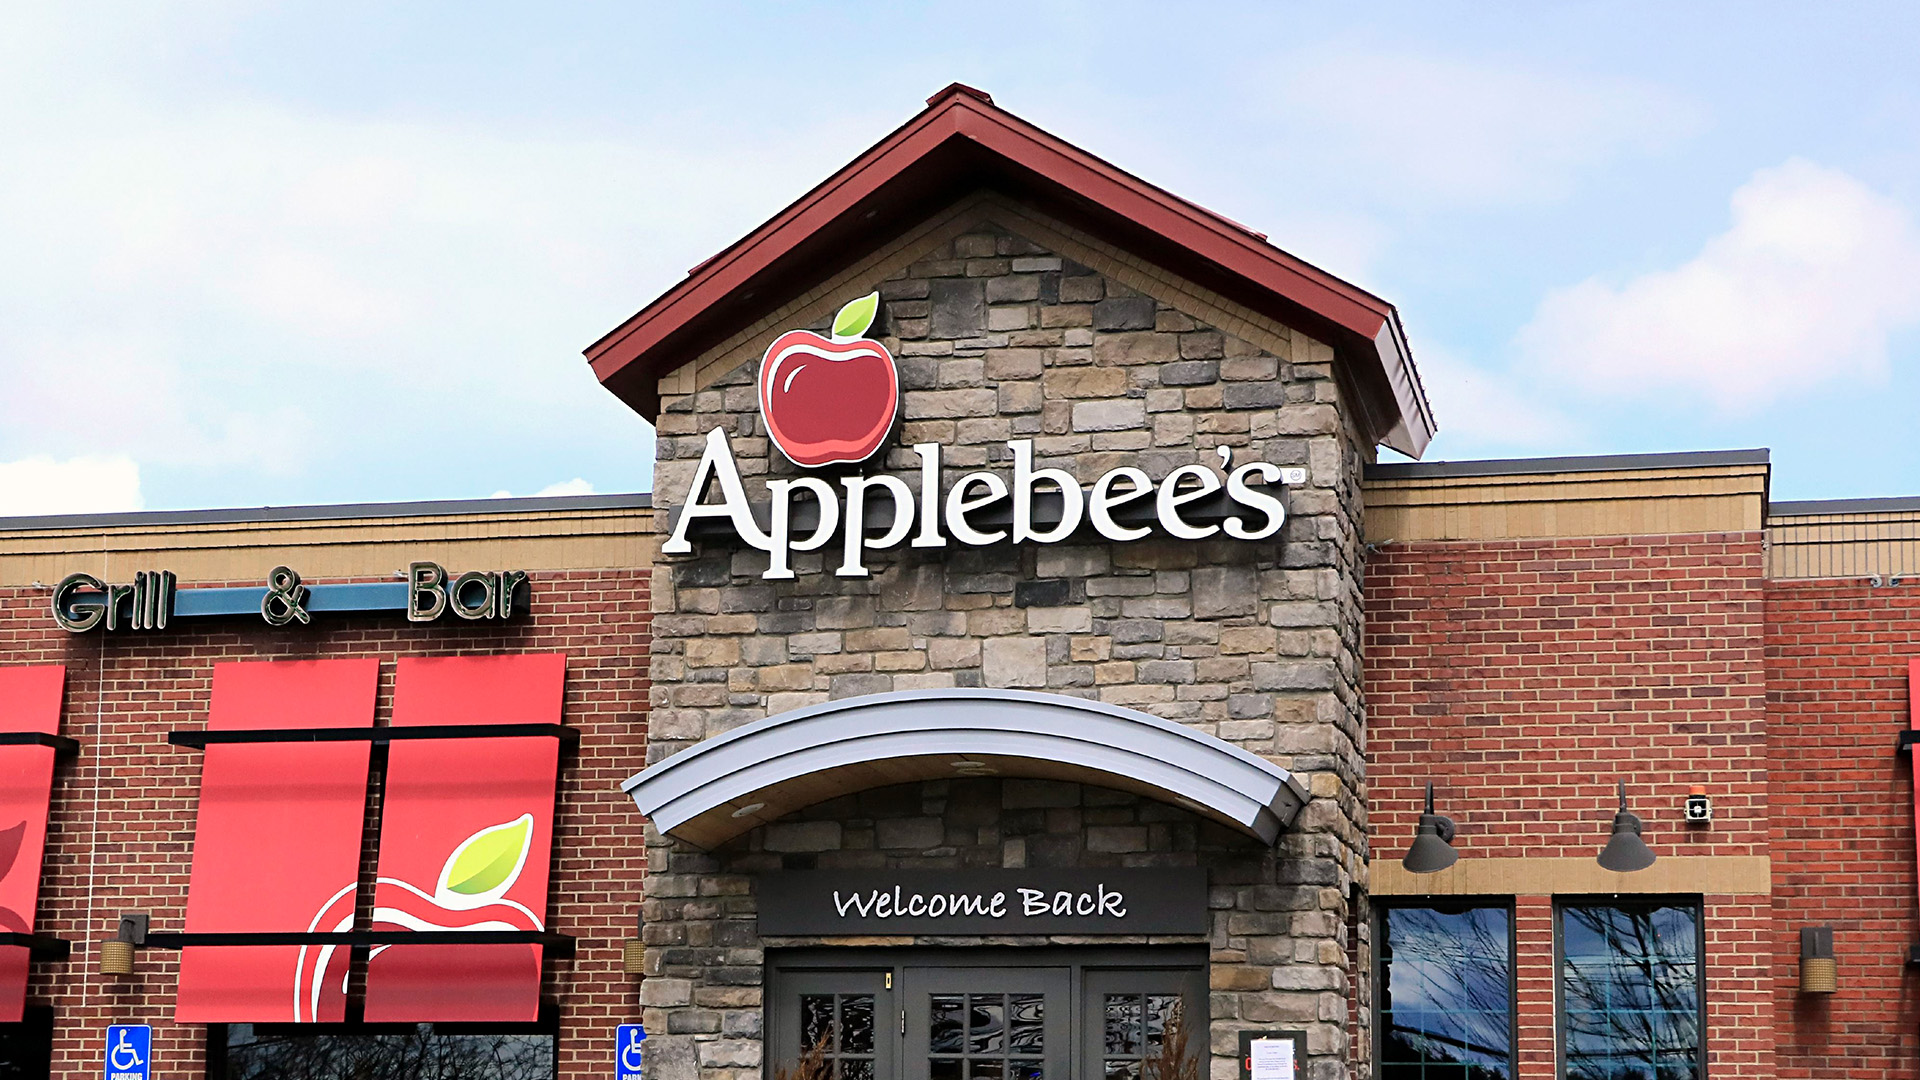 Applebee customers furious over a discontinued item, and a demand chain brings it back to the menu